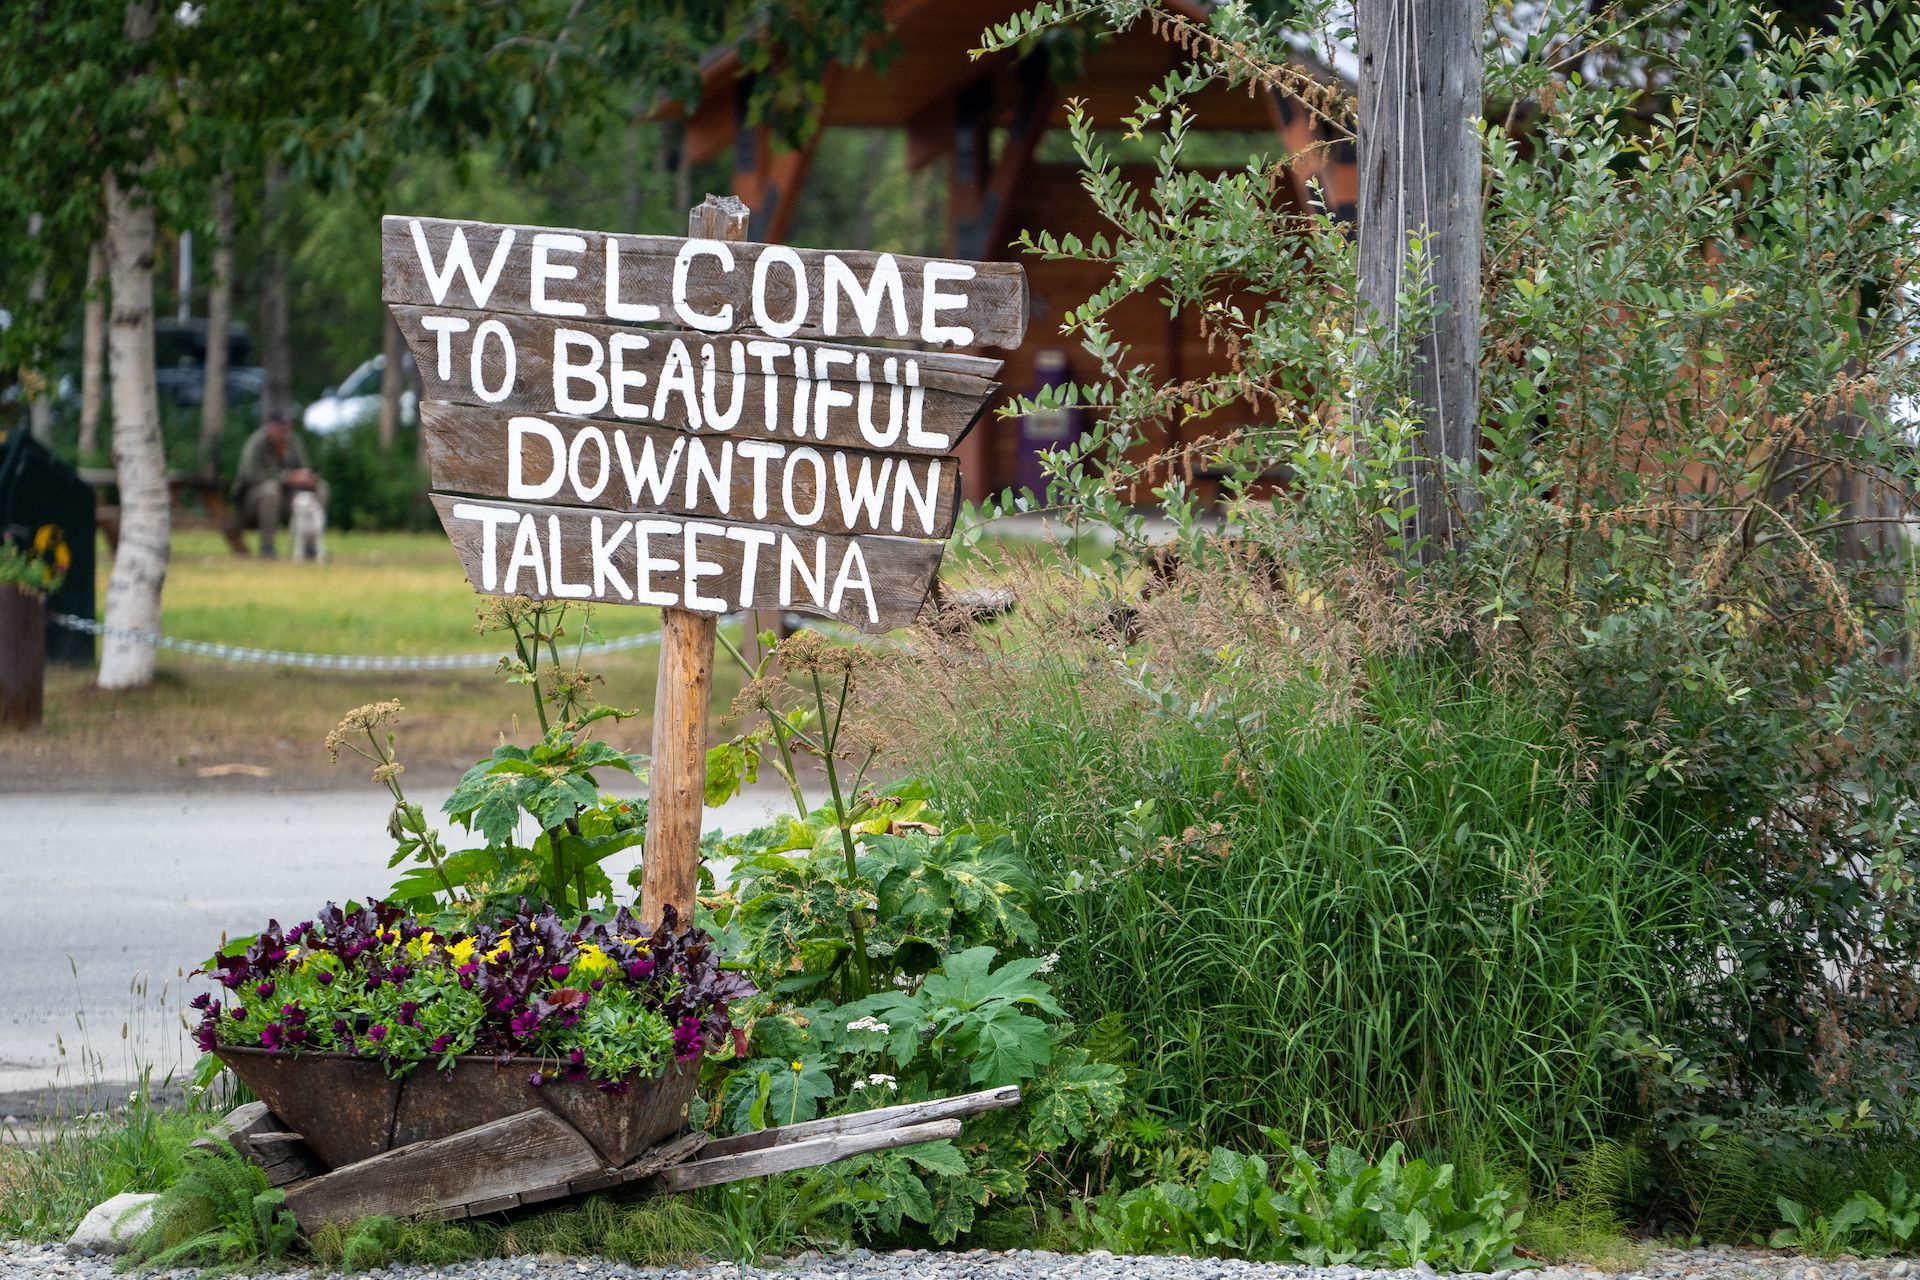 Welcome sign in Talkeetna